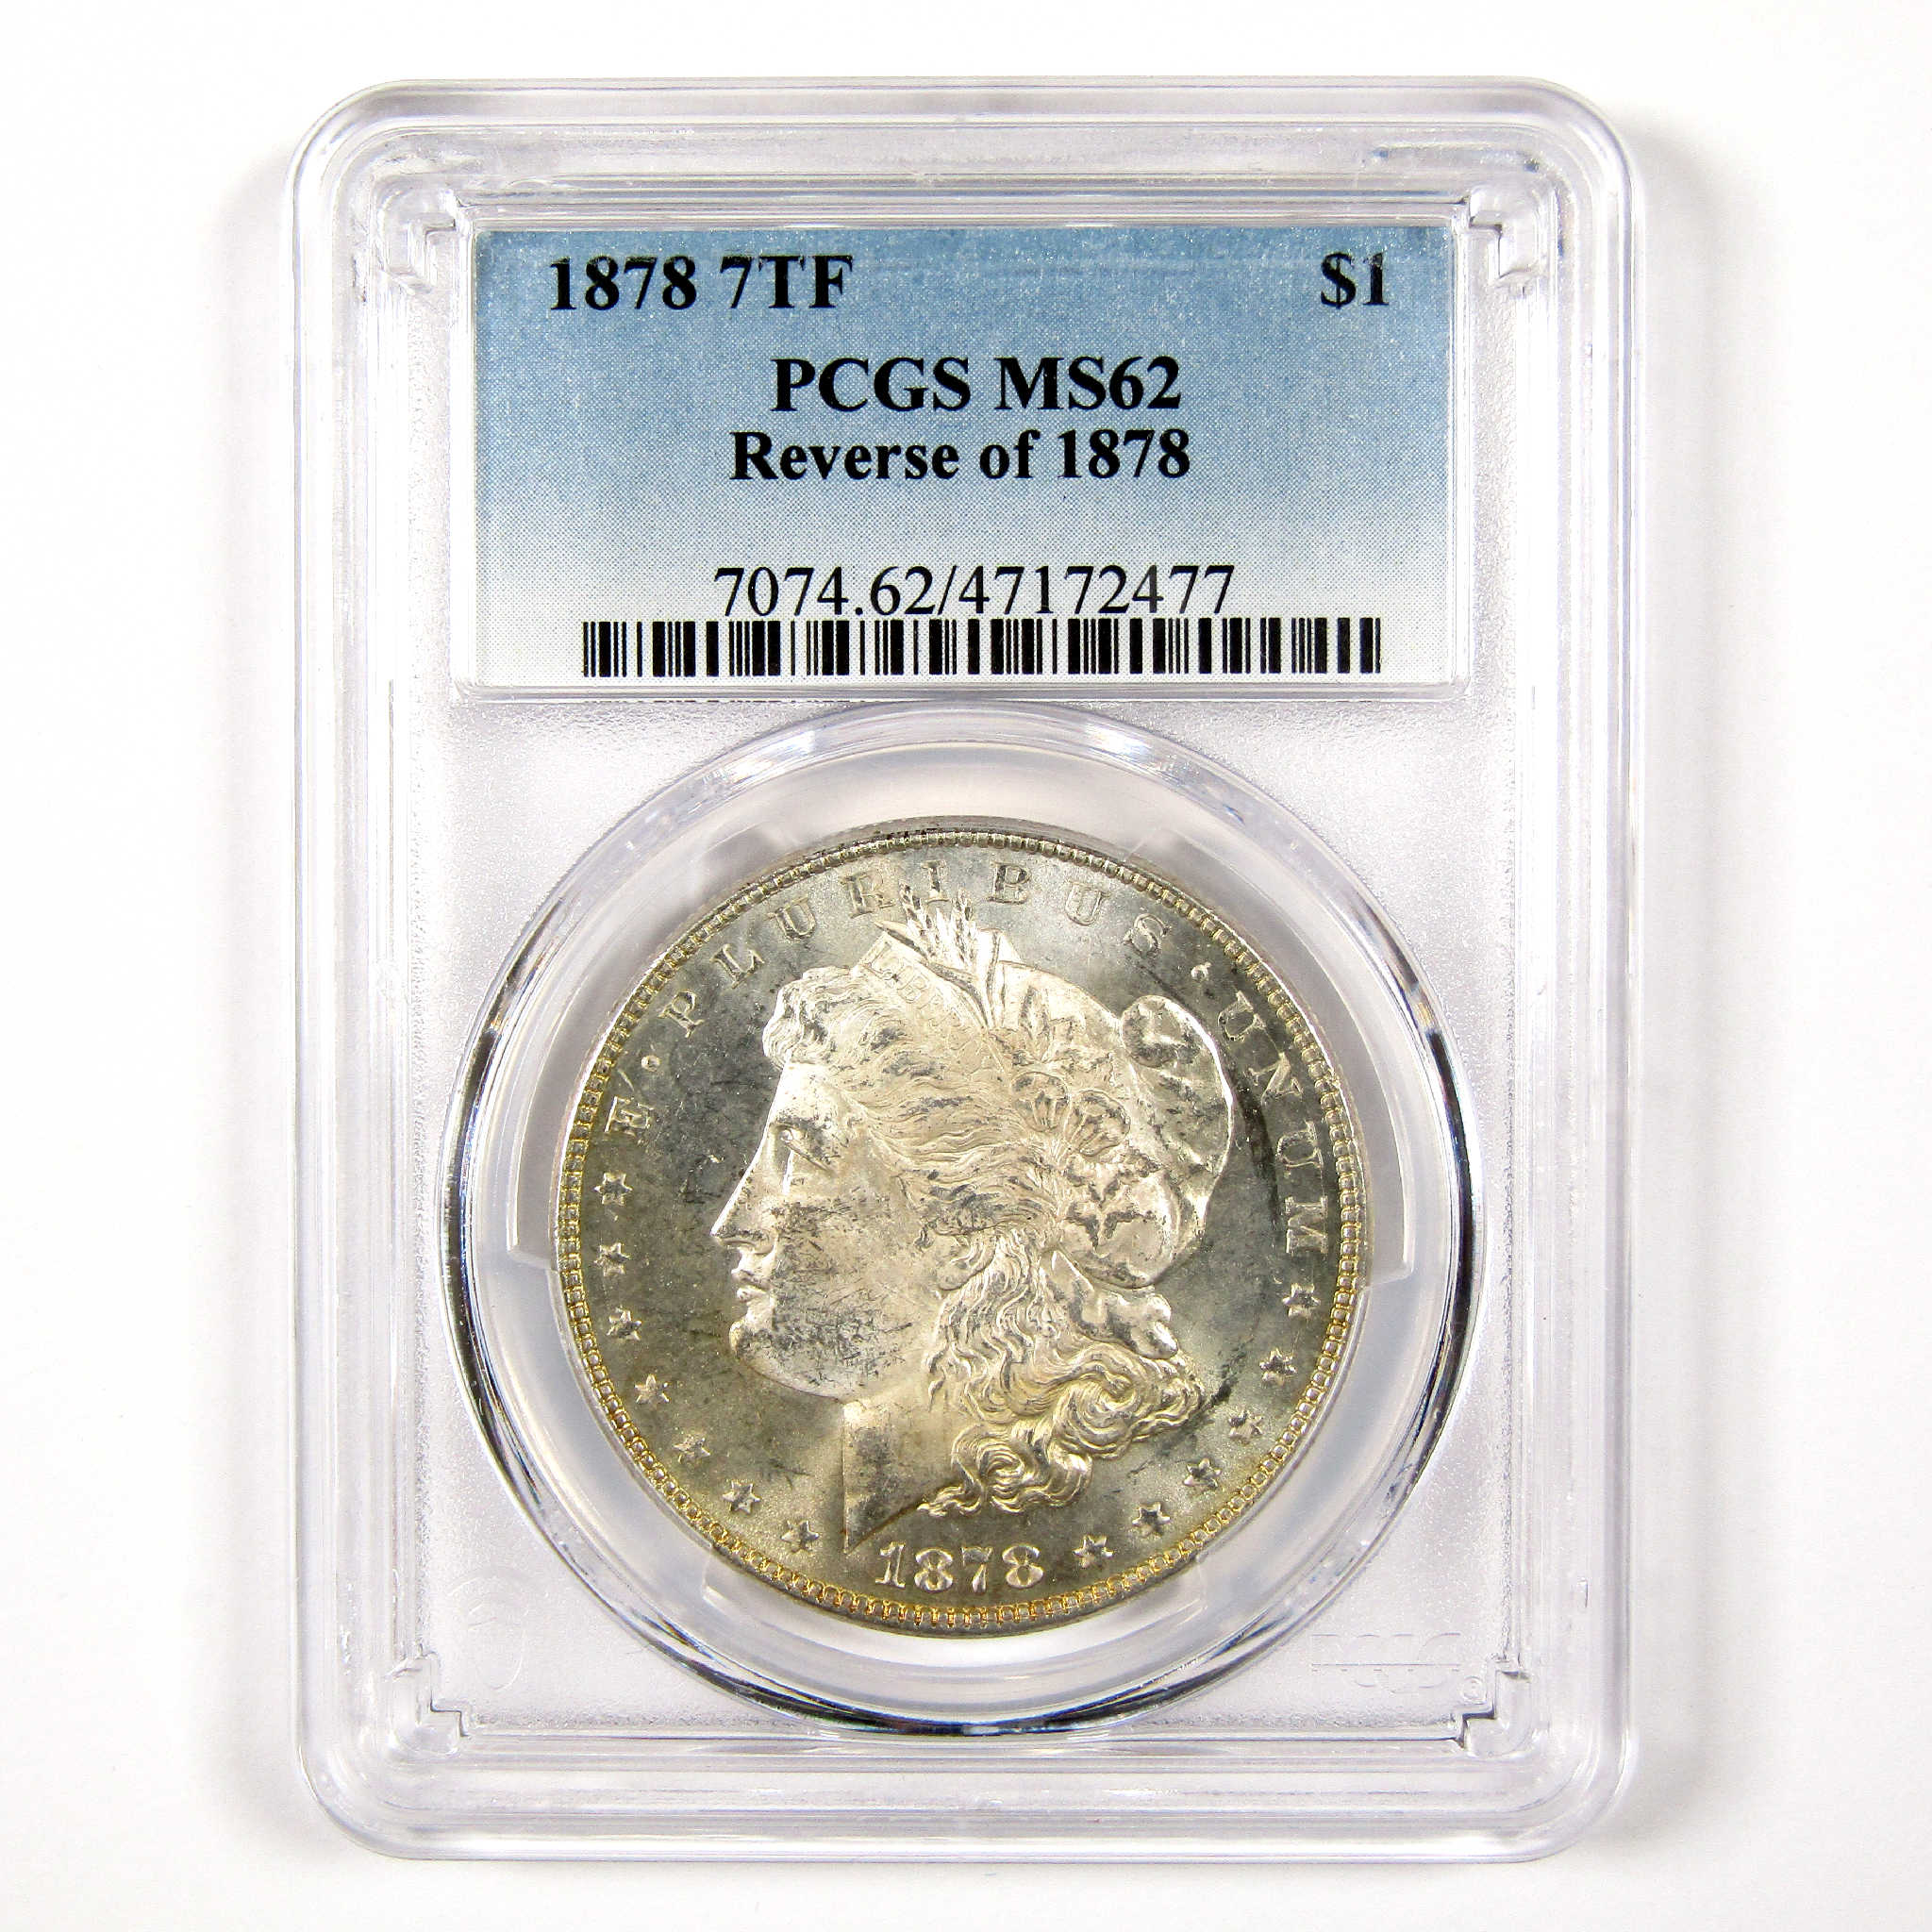 1878 7TF Rev 78 Morgan Dollar MS 62 PCGS Silver $1 Unc SKU:I11306 - Morgan coin - Morgan silver dollar - Morgan silver dollar for sale - Profile Coins &amp; Collectibles